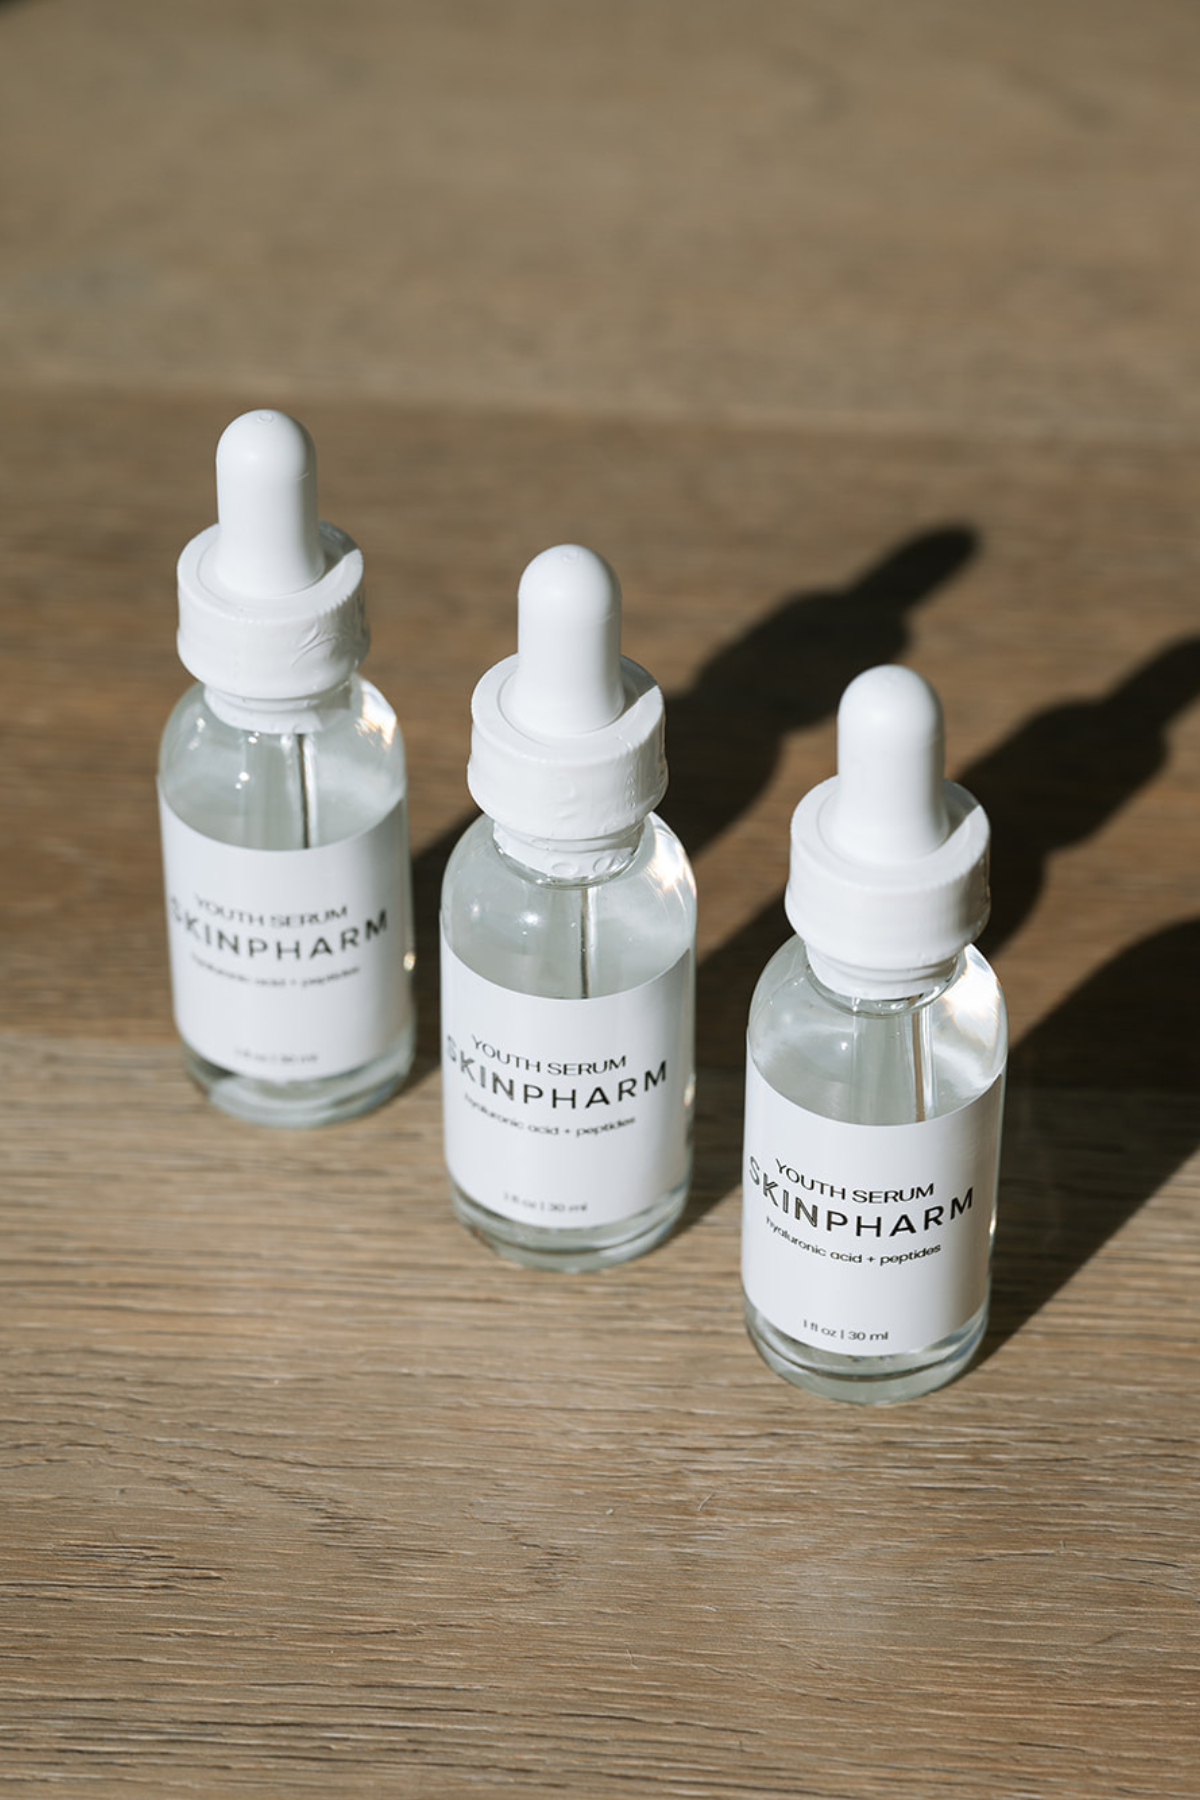 Serum vs. Cream: What’s the Difference?